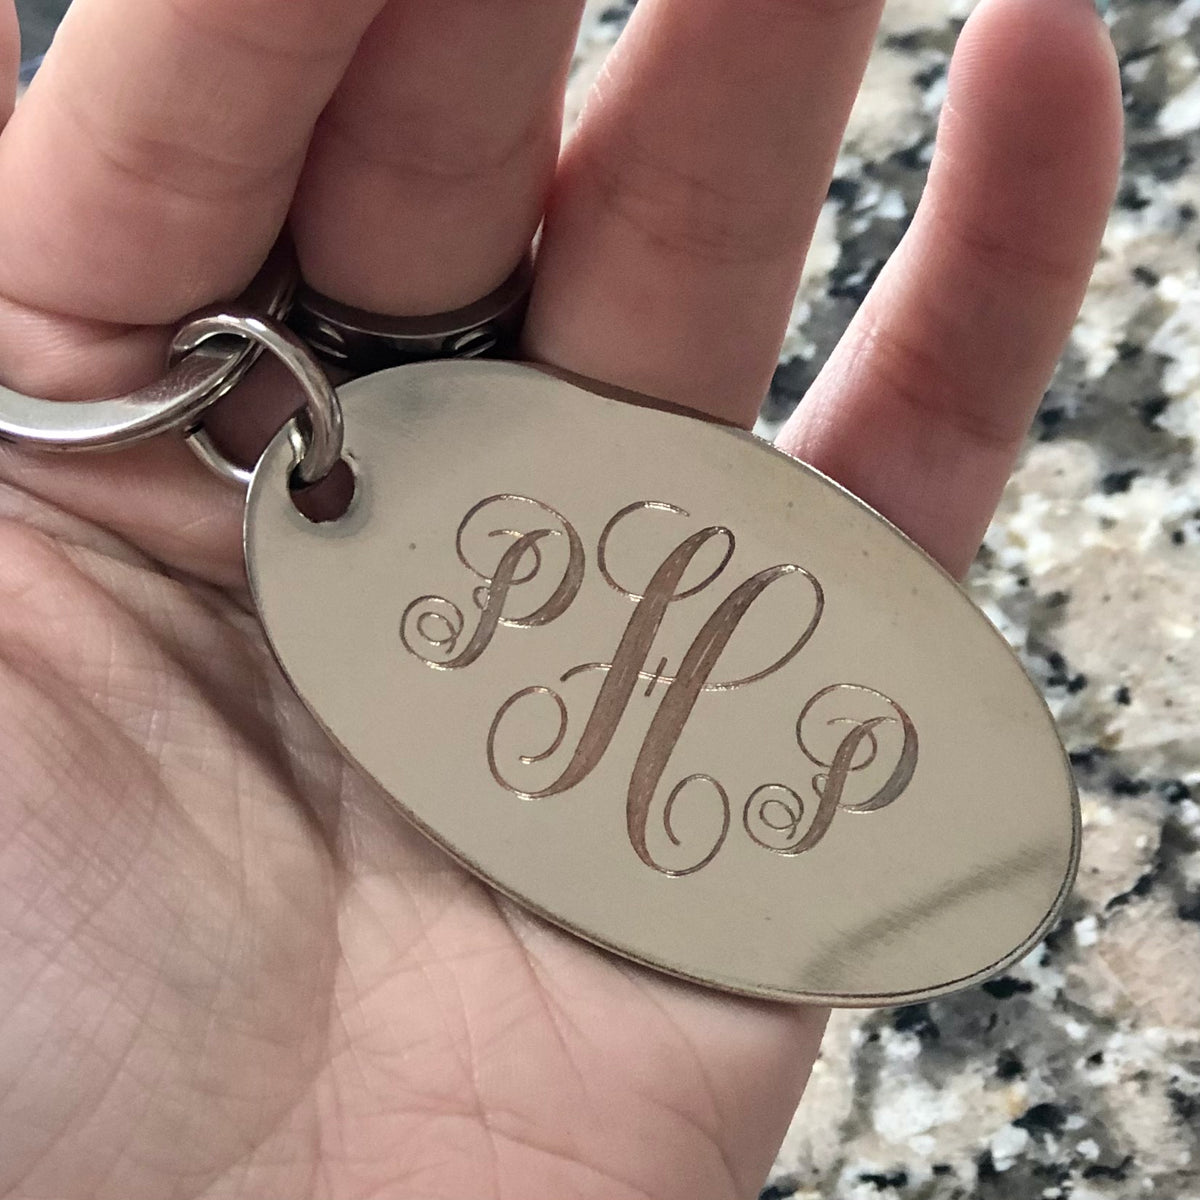 Engraved Silver Coin Key Chain